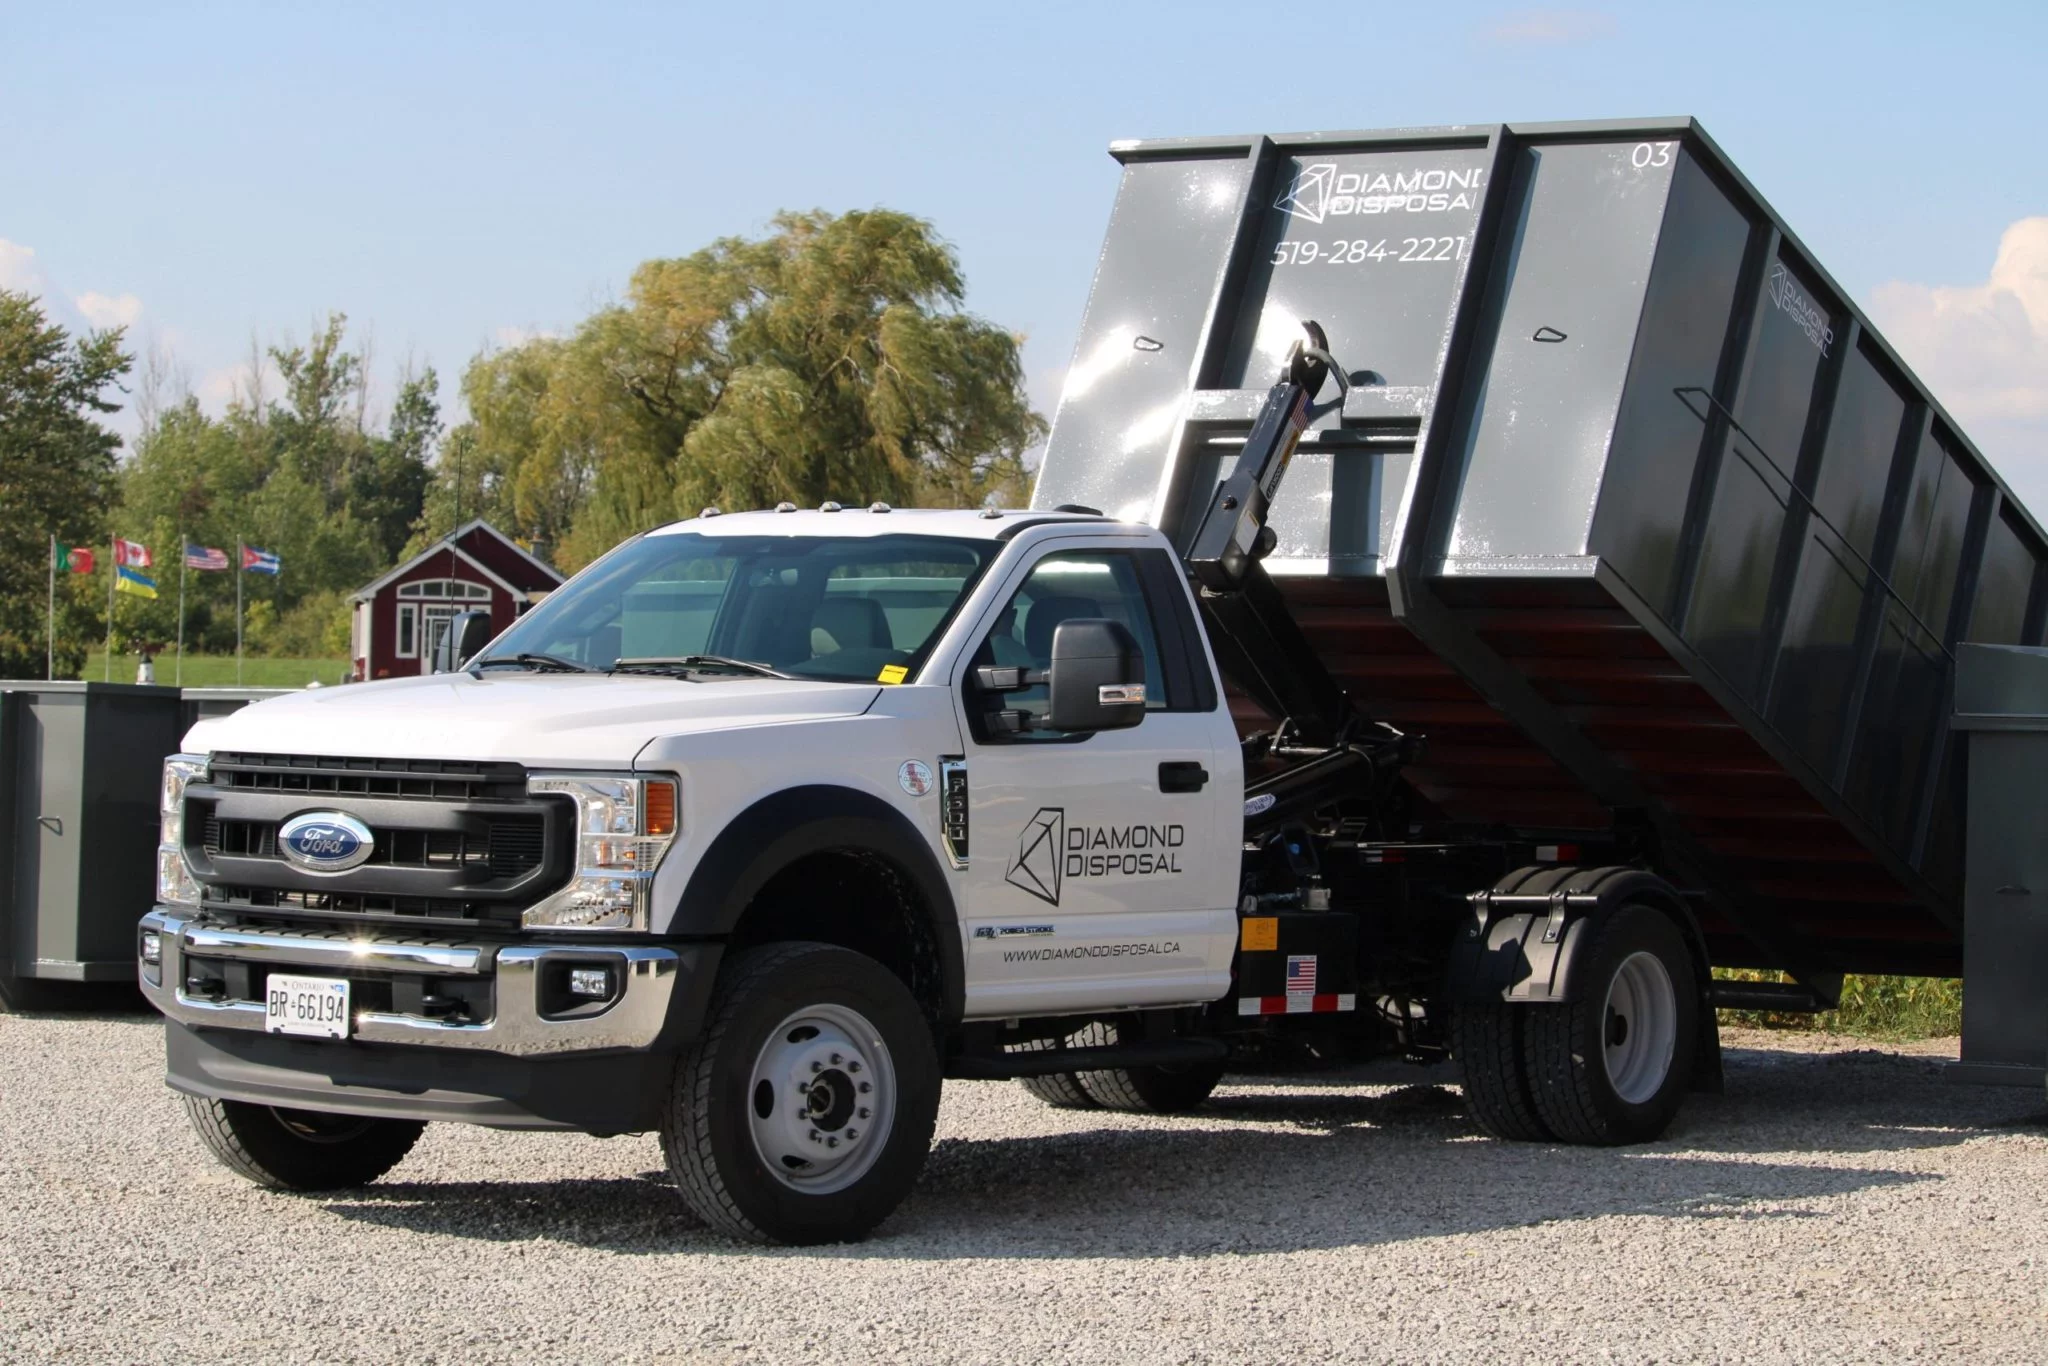 Junk Removal Services in Stratford, Ontario